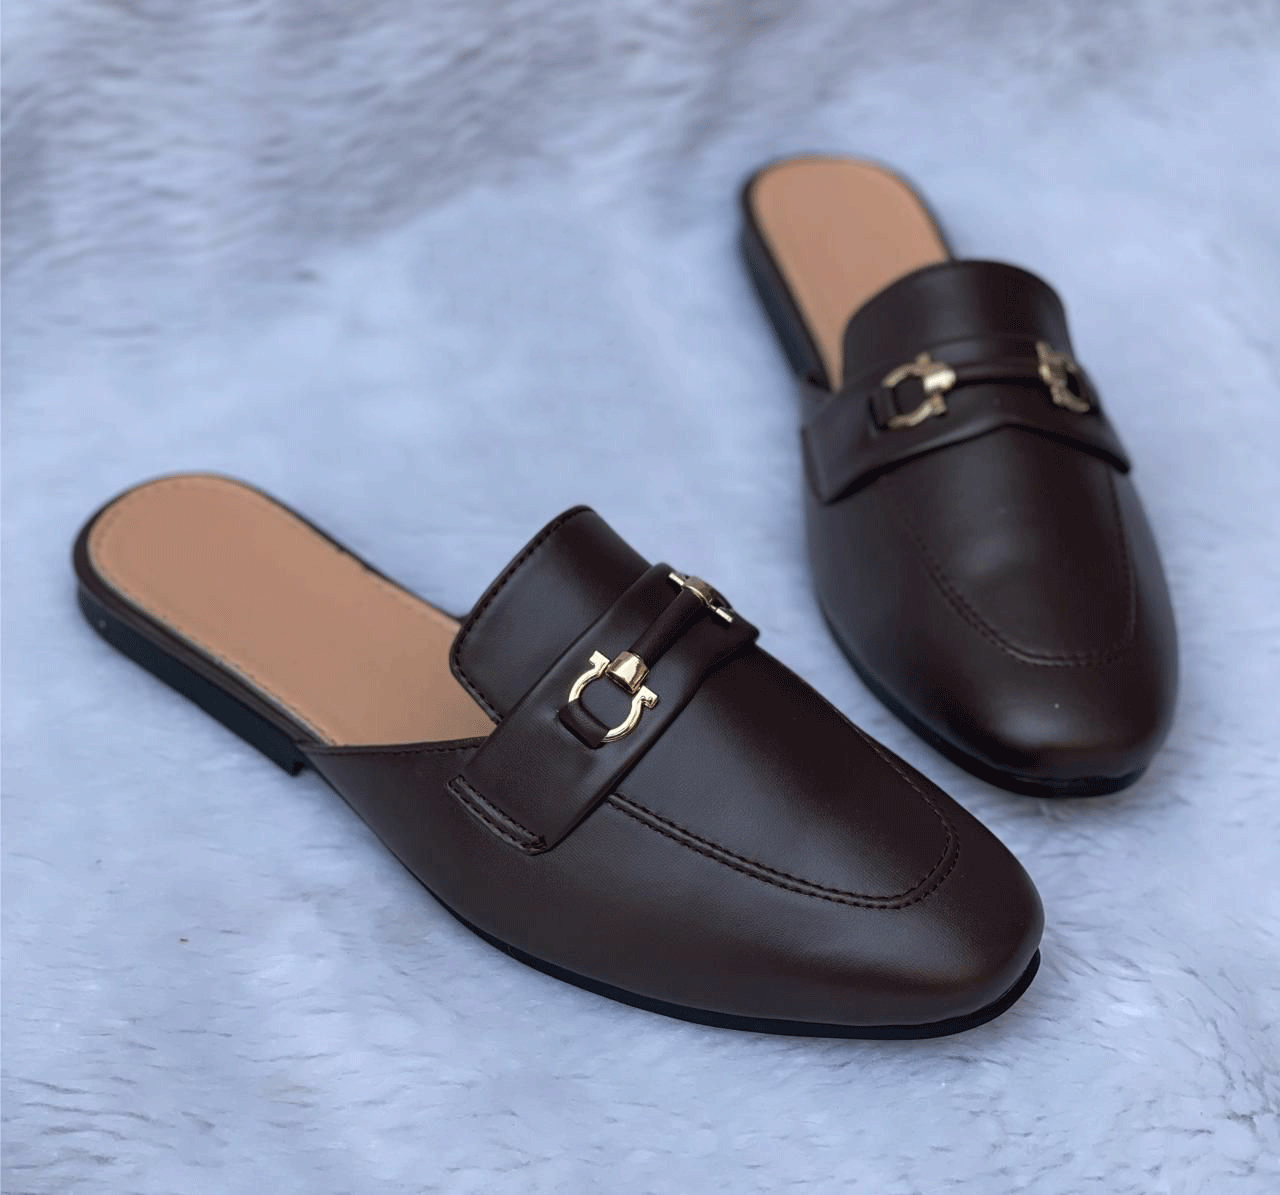 Men's Backless Slip On Mule Gold Buckle Loafers Shoes-UniqueandClassy